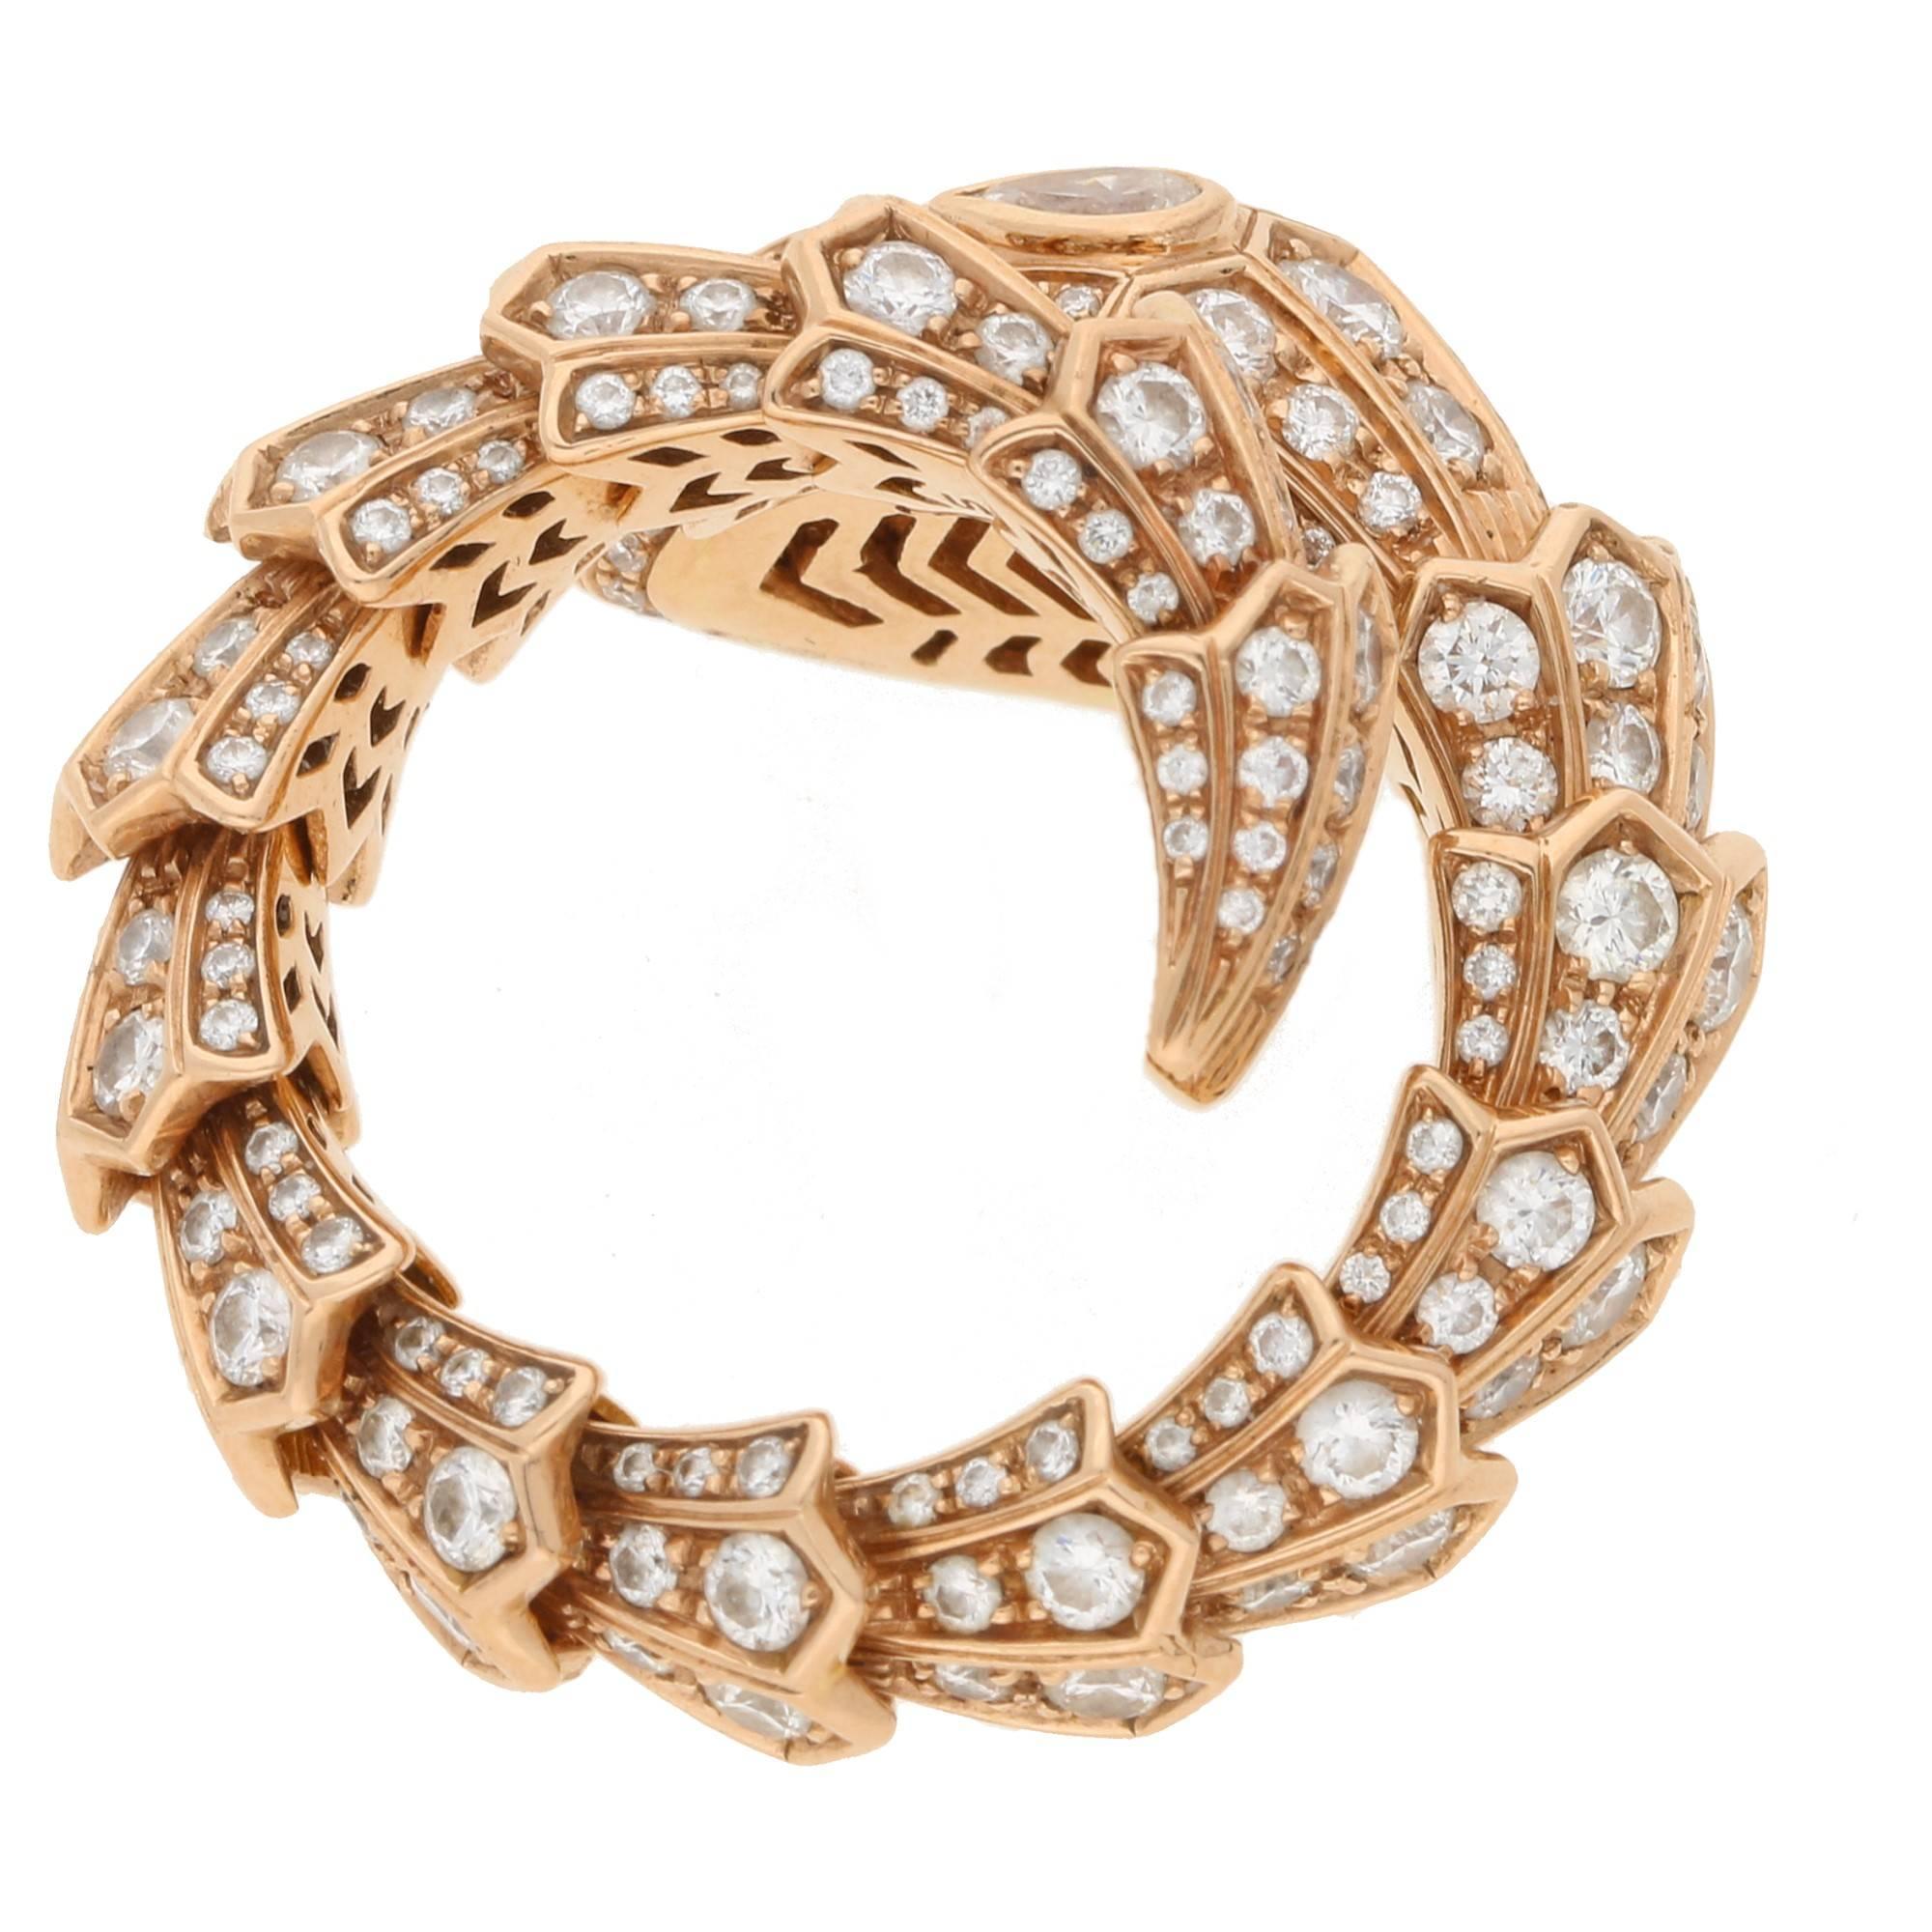 A pave diamond set snake ring signed Bulgari. From the Bulgari Serpenti range the ring coils around the finger in an articulated manner. The ring is made in 18ct rose gold and has approximately 3.20ct of diamonds set in it, the diamonds are